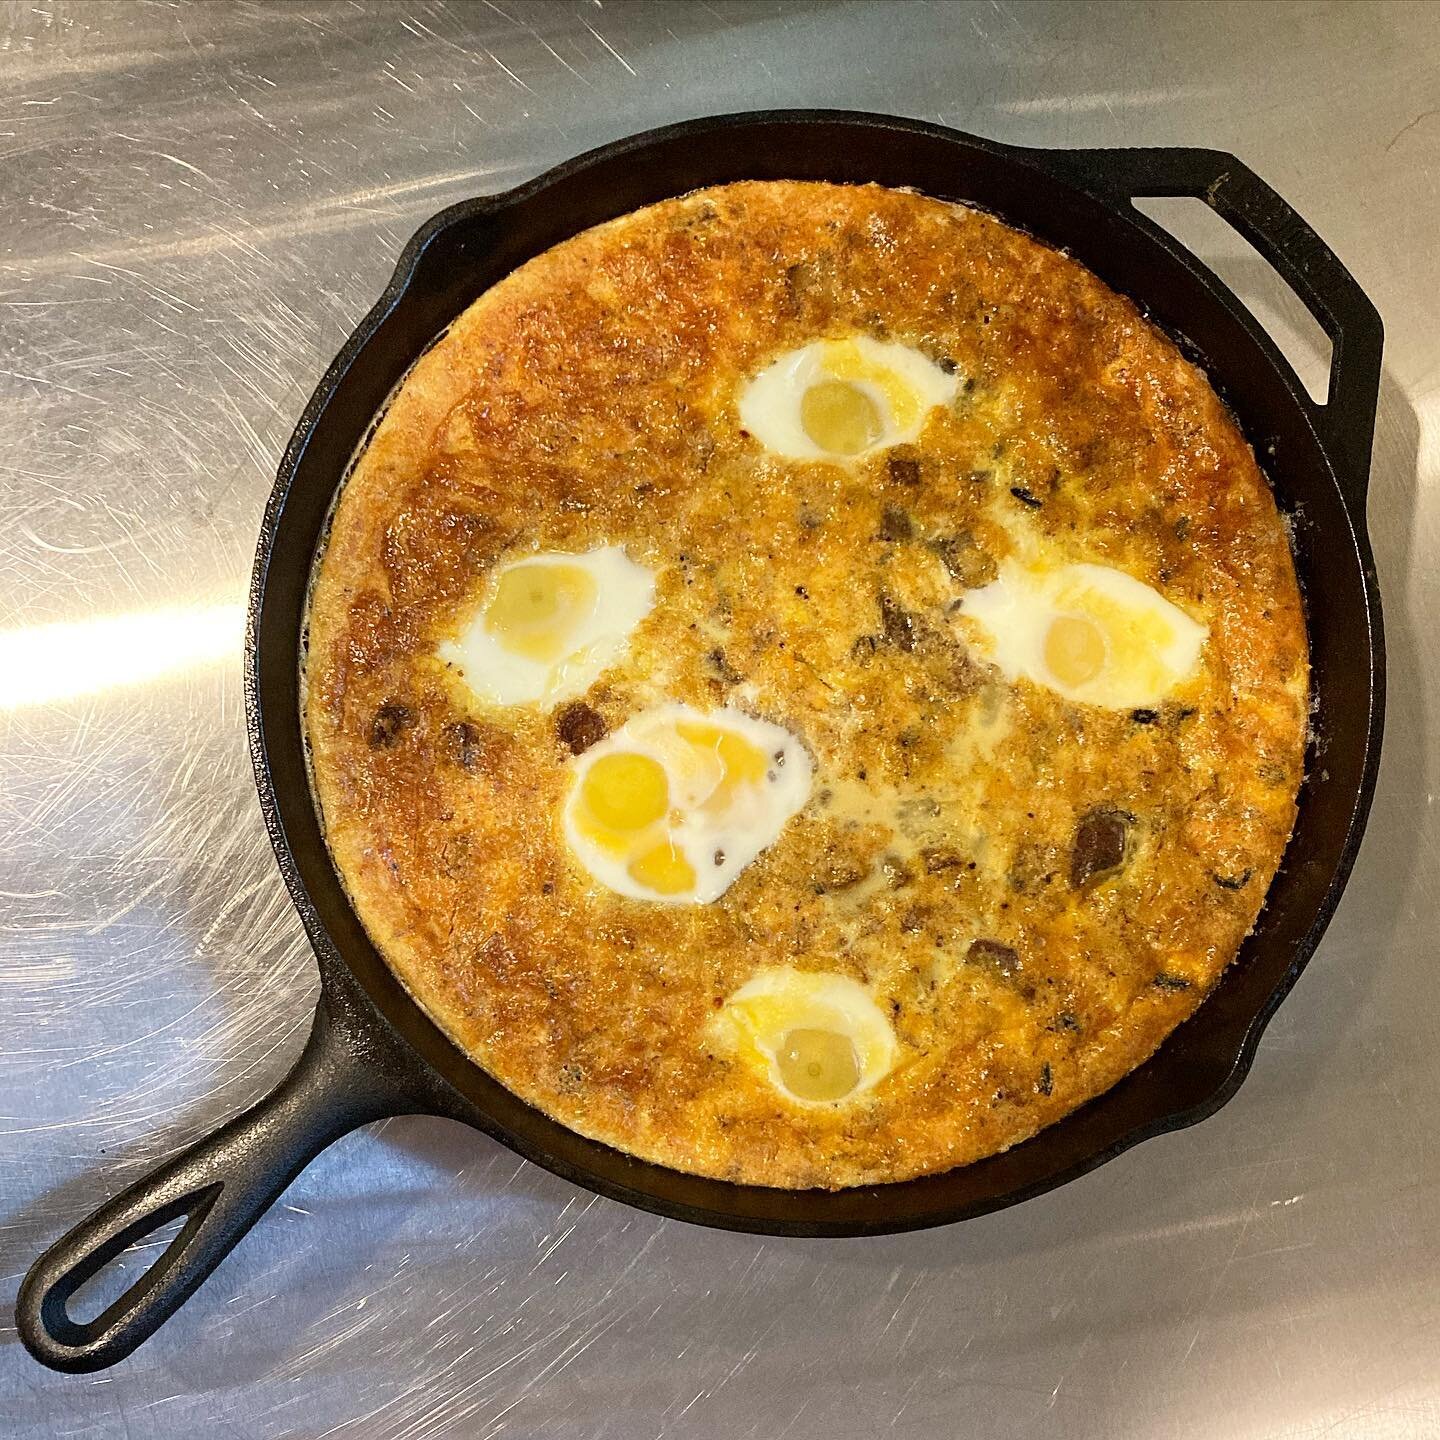 A quiche made with local eggs, milk, black beans and potatoes was among the menu items this week. 